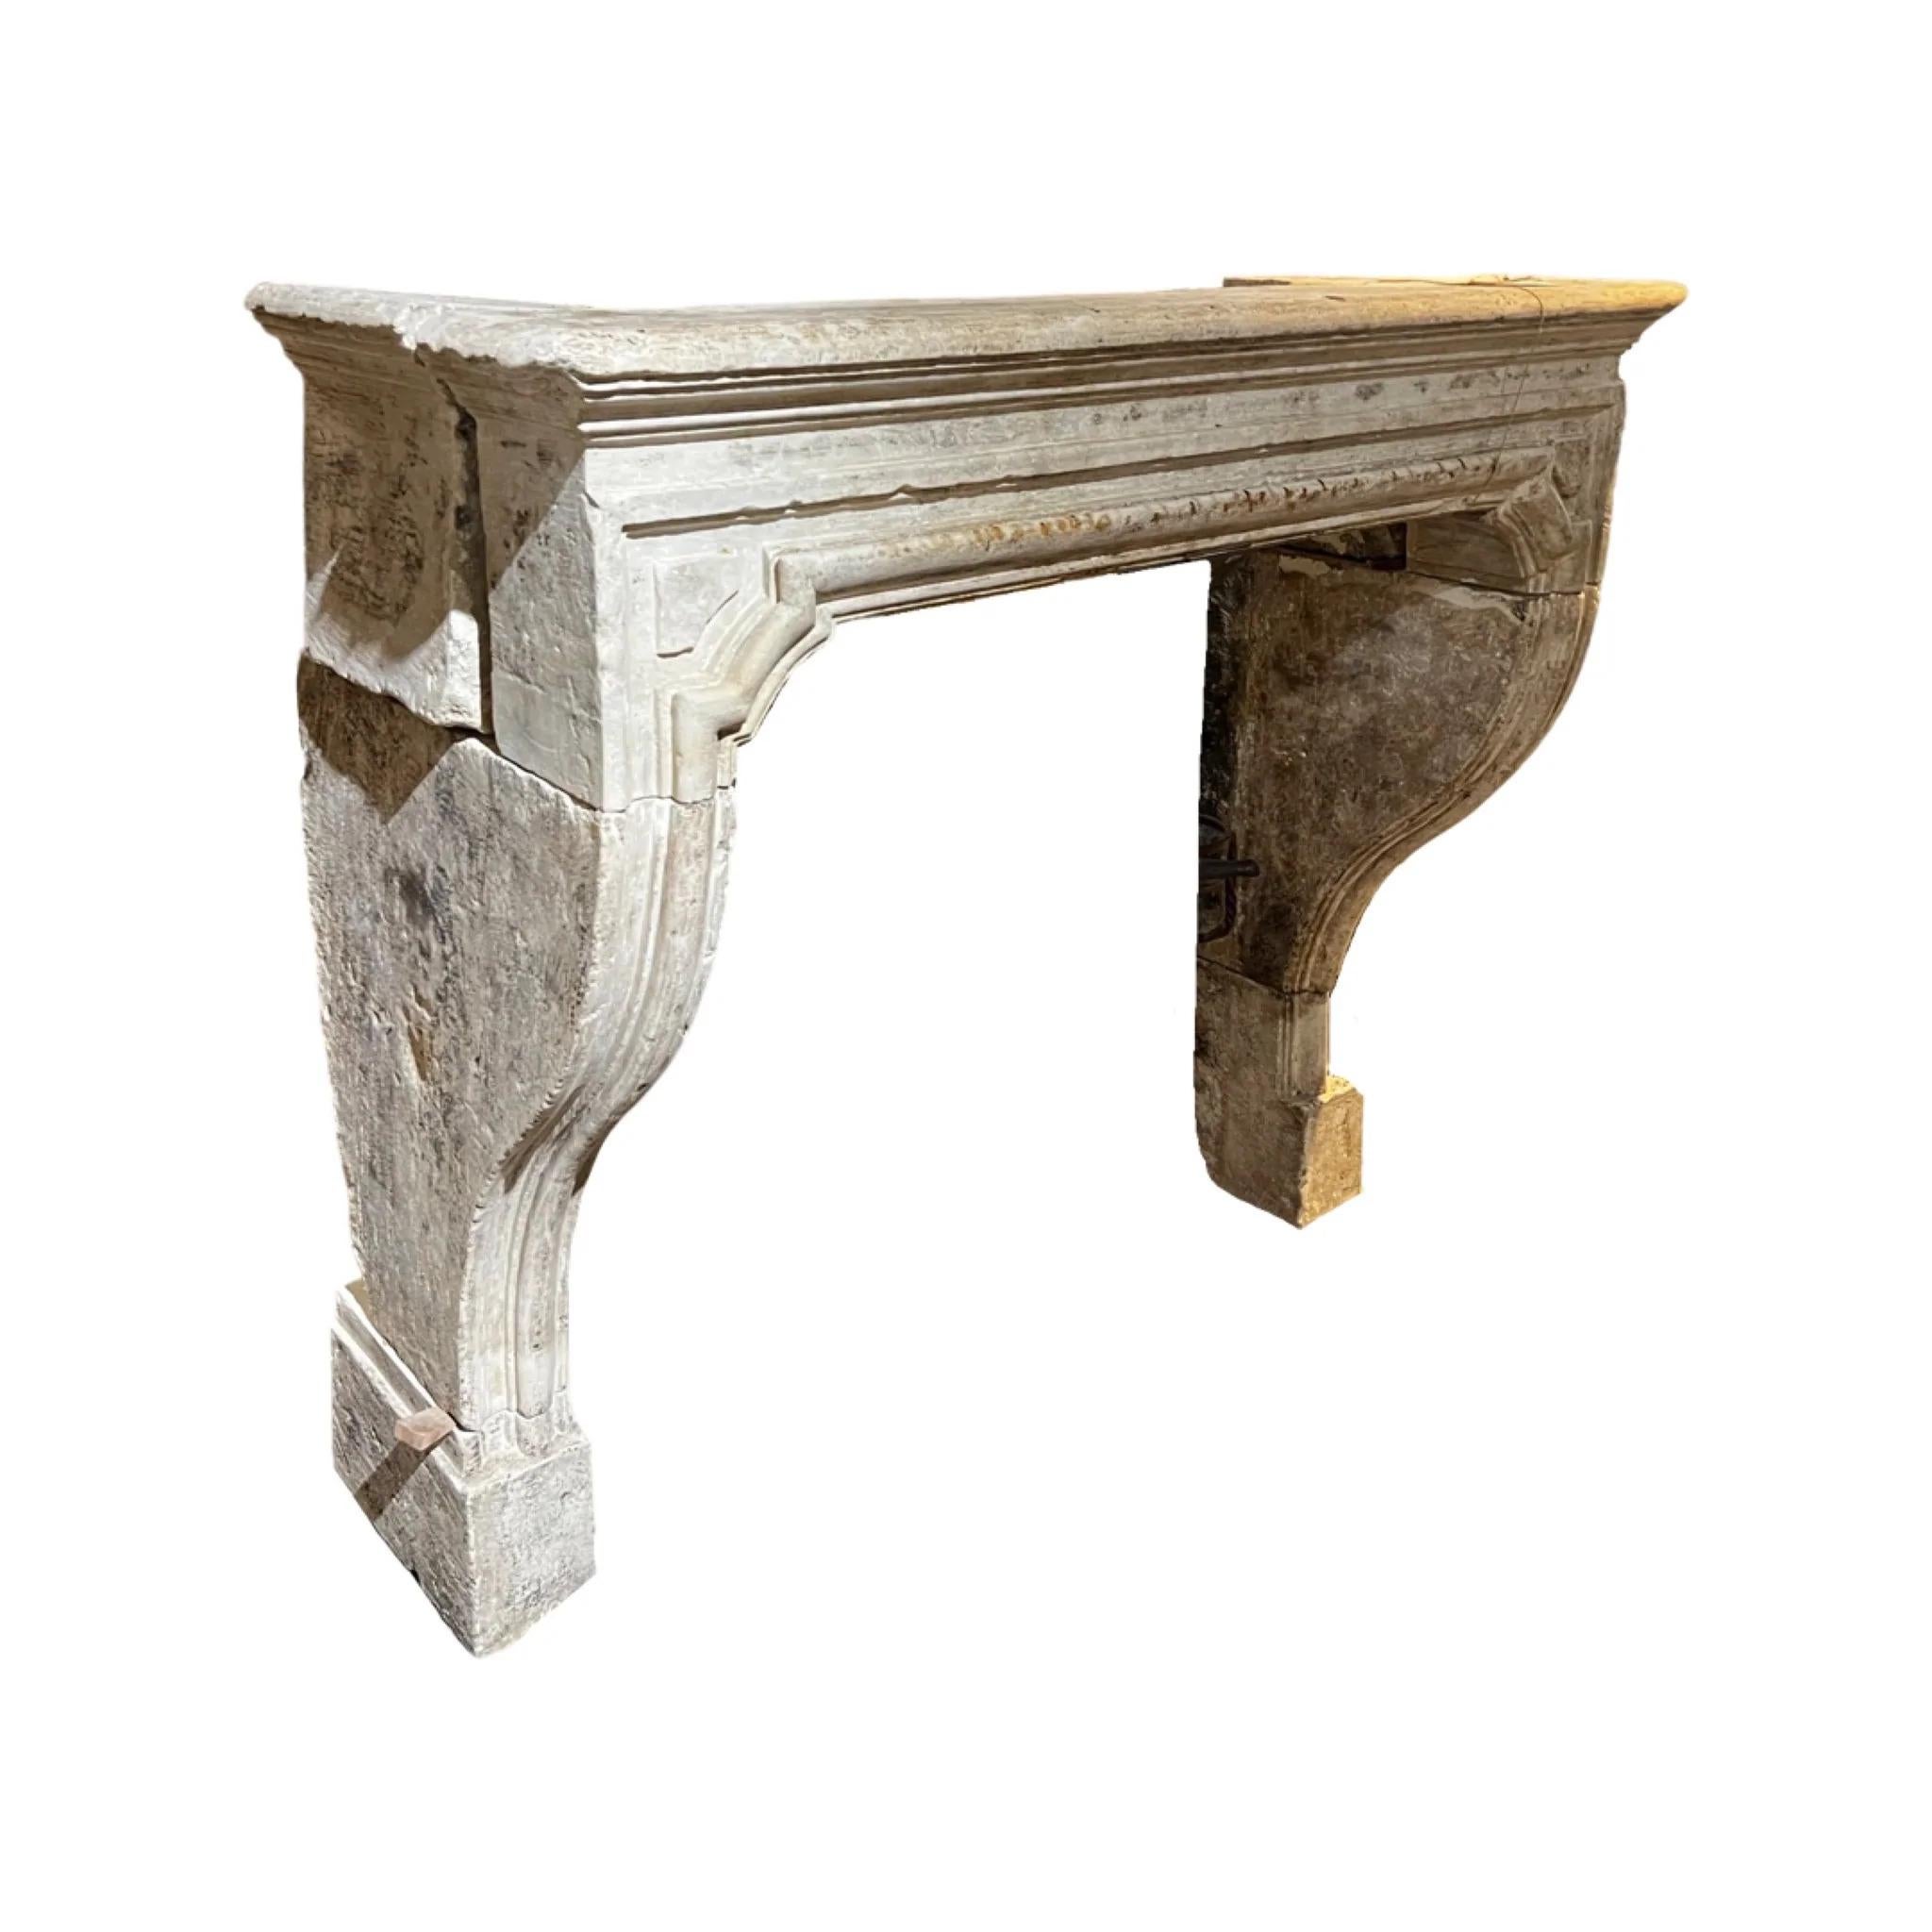 Louis XVI style mantel. Made out of limestone. Originates from France. Circa, 1720.